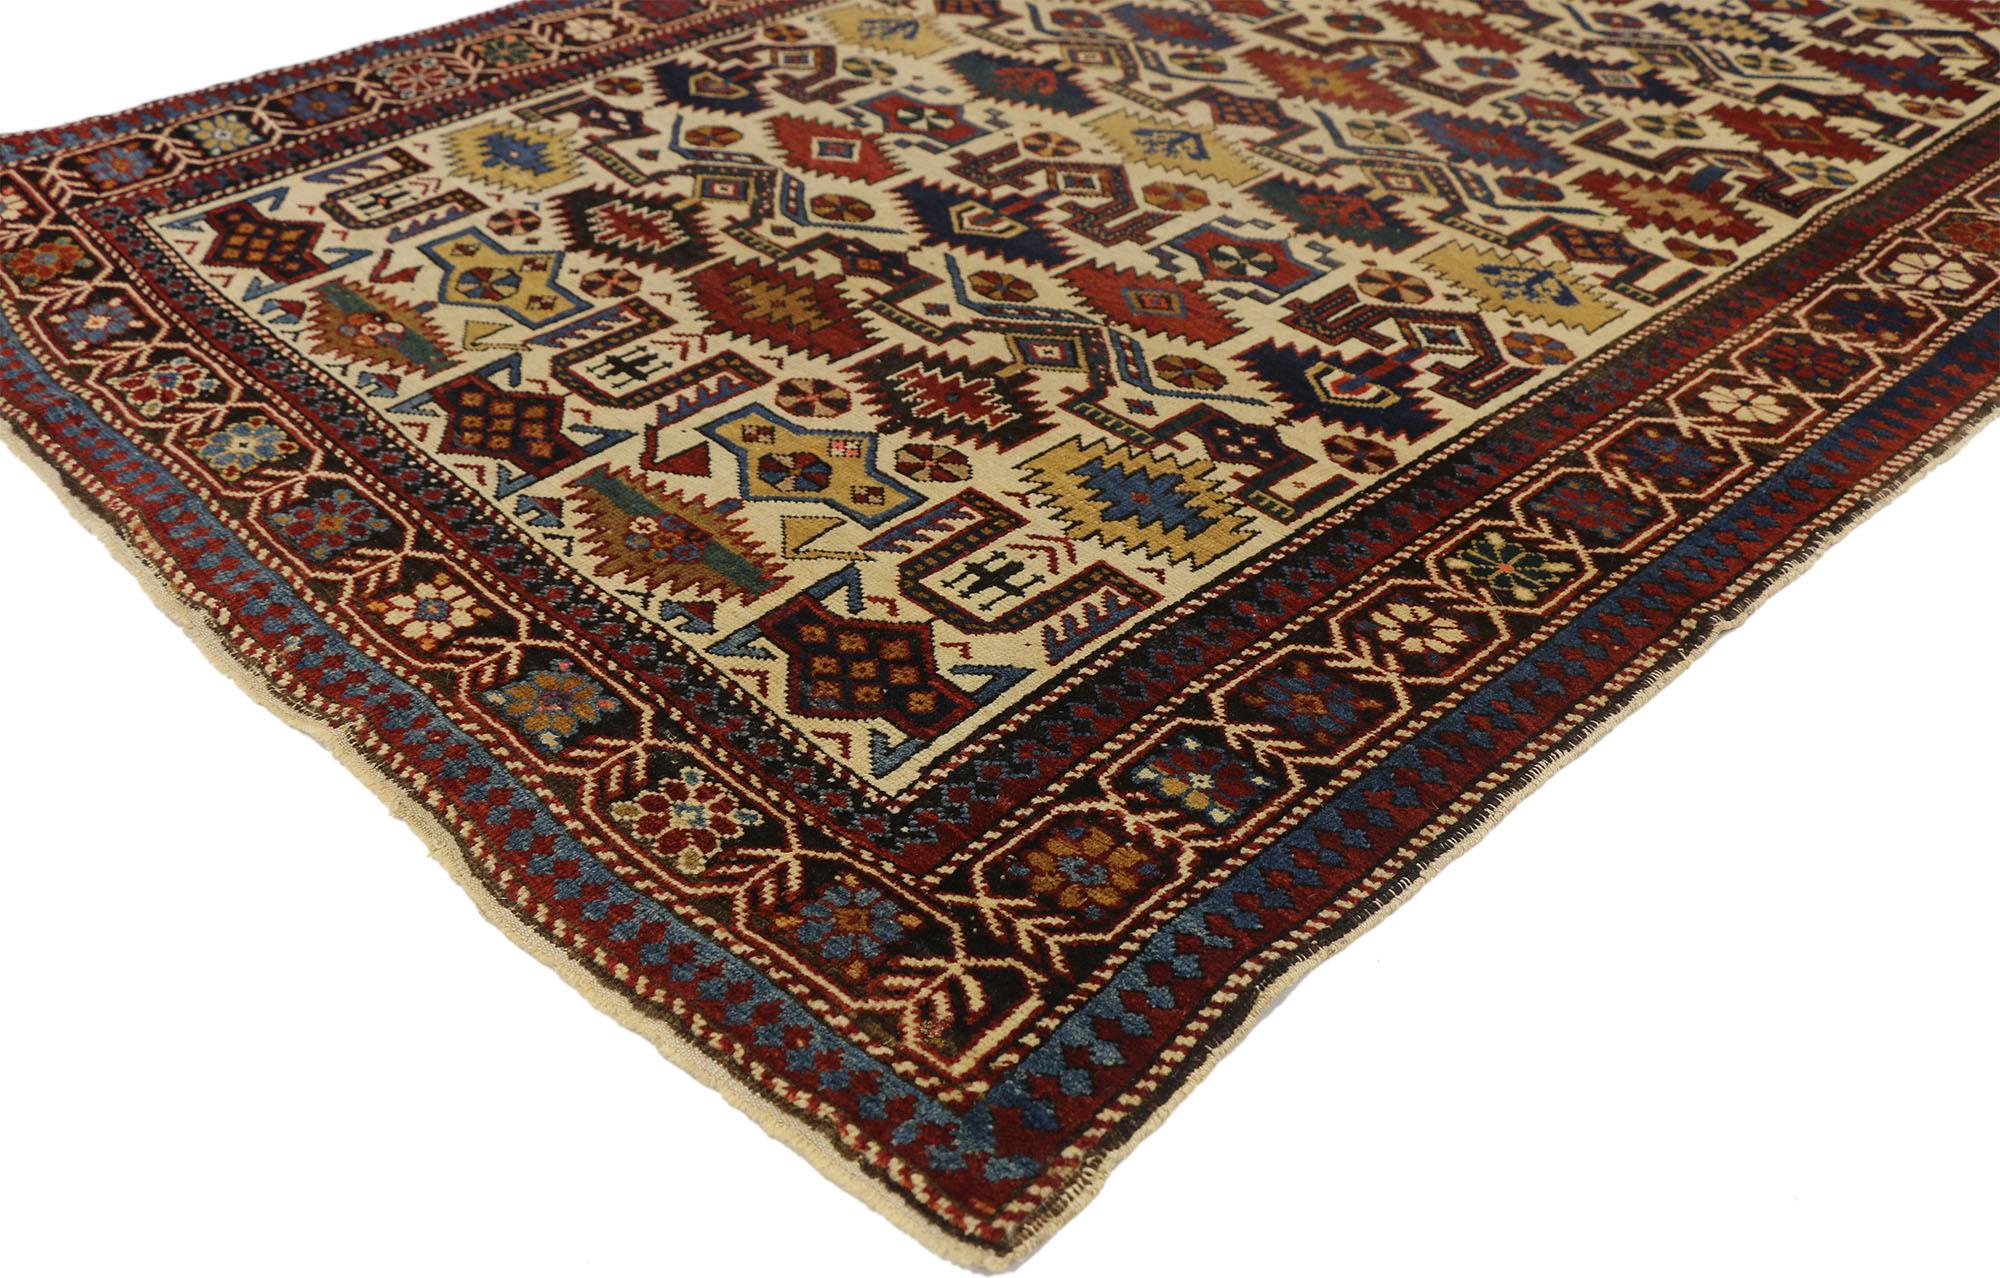 This antique Caucasian Shirvan rug with modern tribal style features an allover geometric pattern on a vanilla beige field surrounded by a simplistic floral border. The color palette consists of red, blue, ivory-beige, mustard yellow, rust, teal,